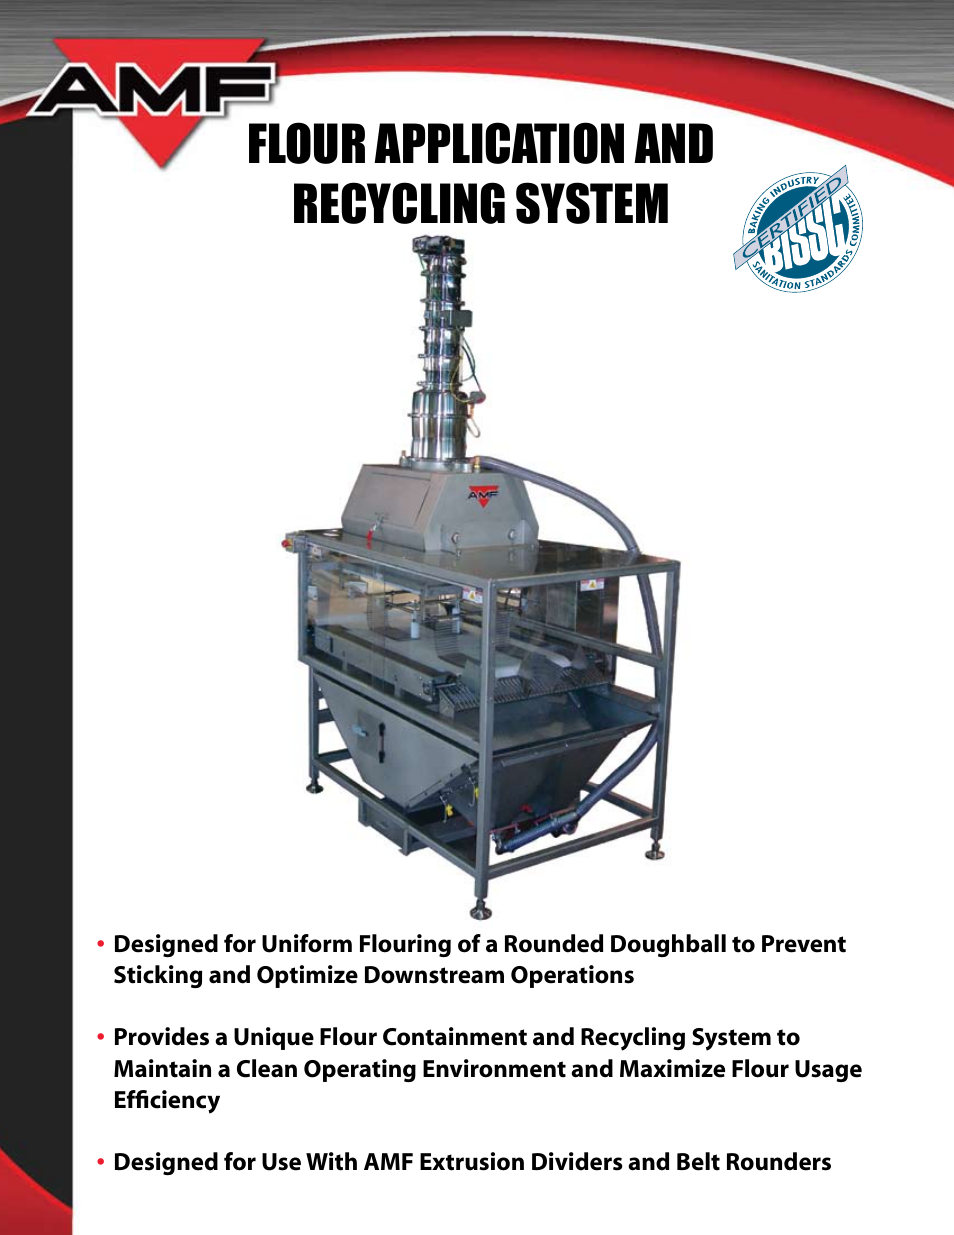 Flour Application and Recycling System